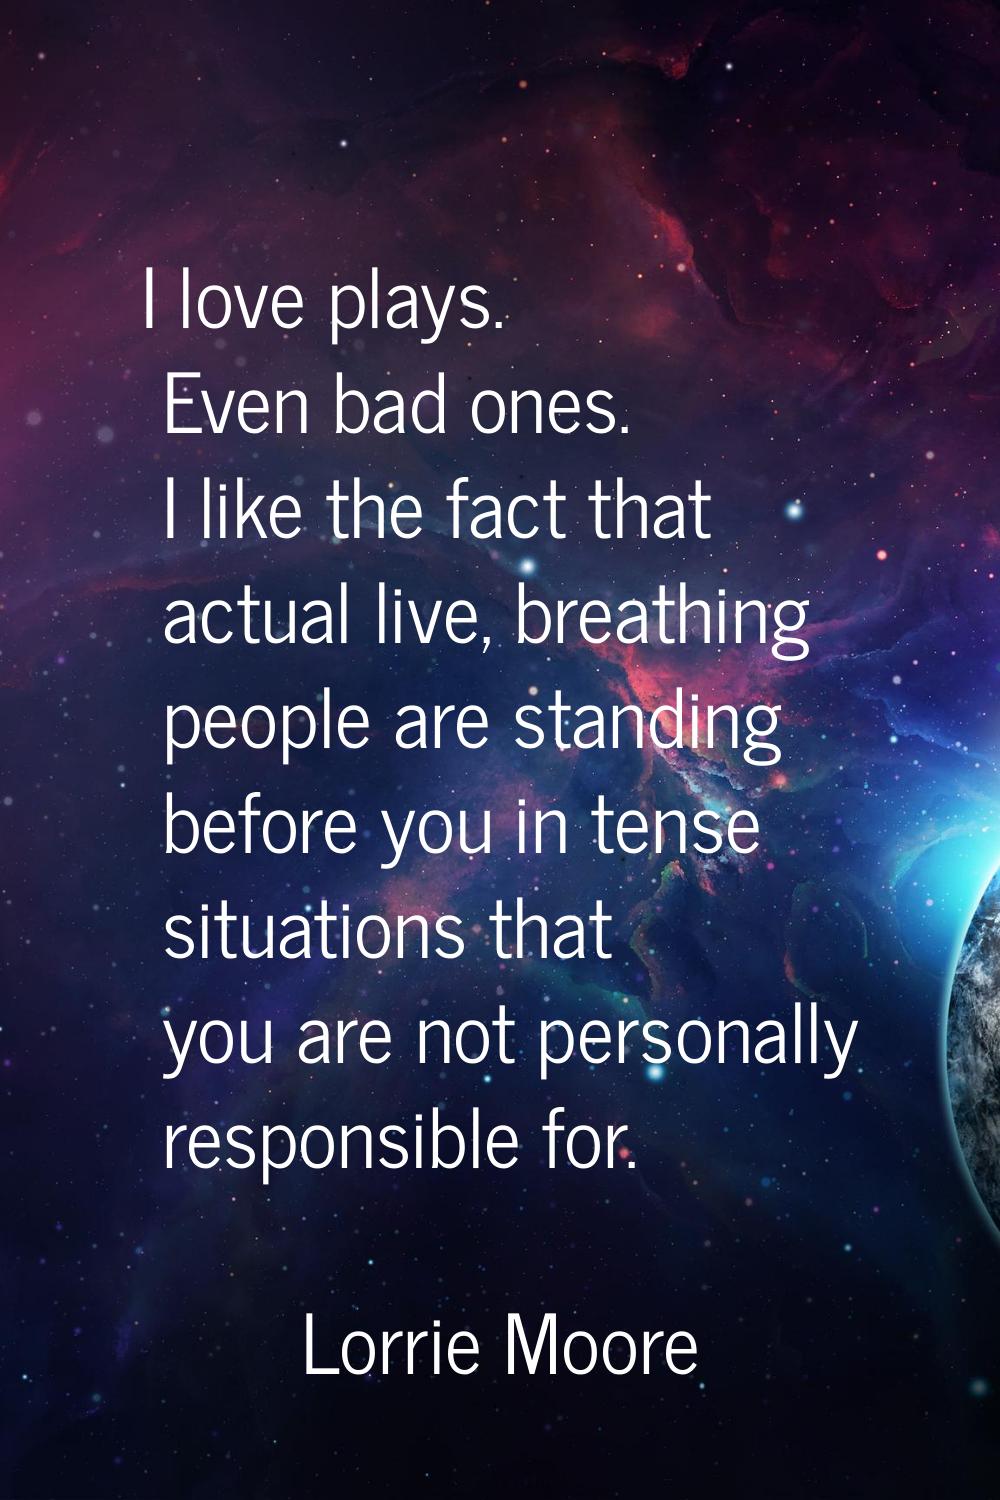 I love plays. Even bad ones. I like the fact that actual live, breathing people are standing before